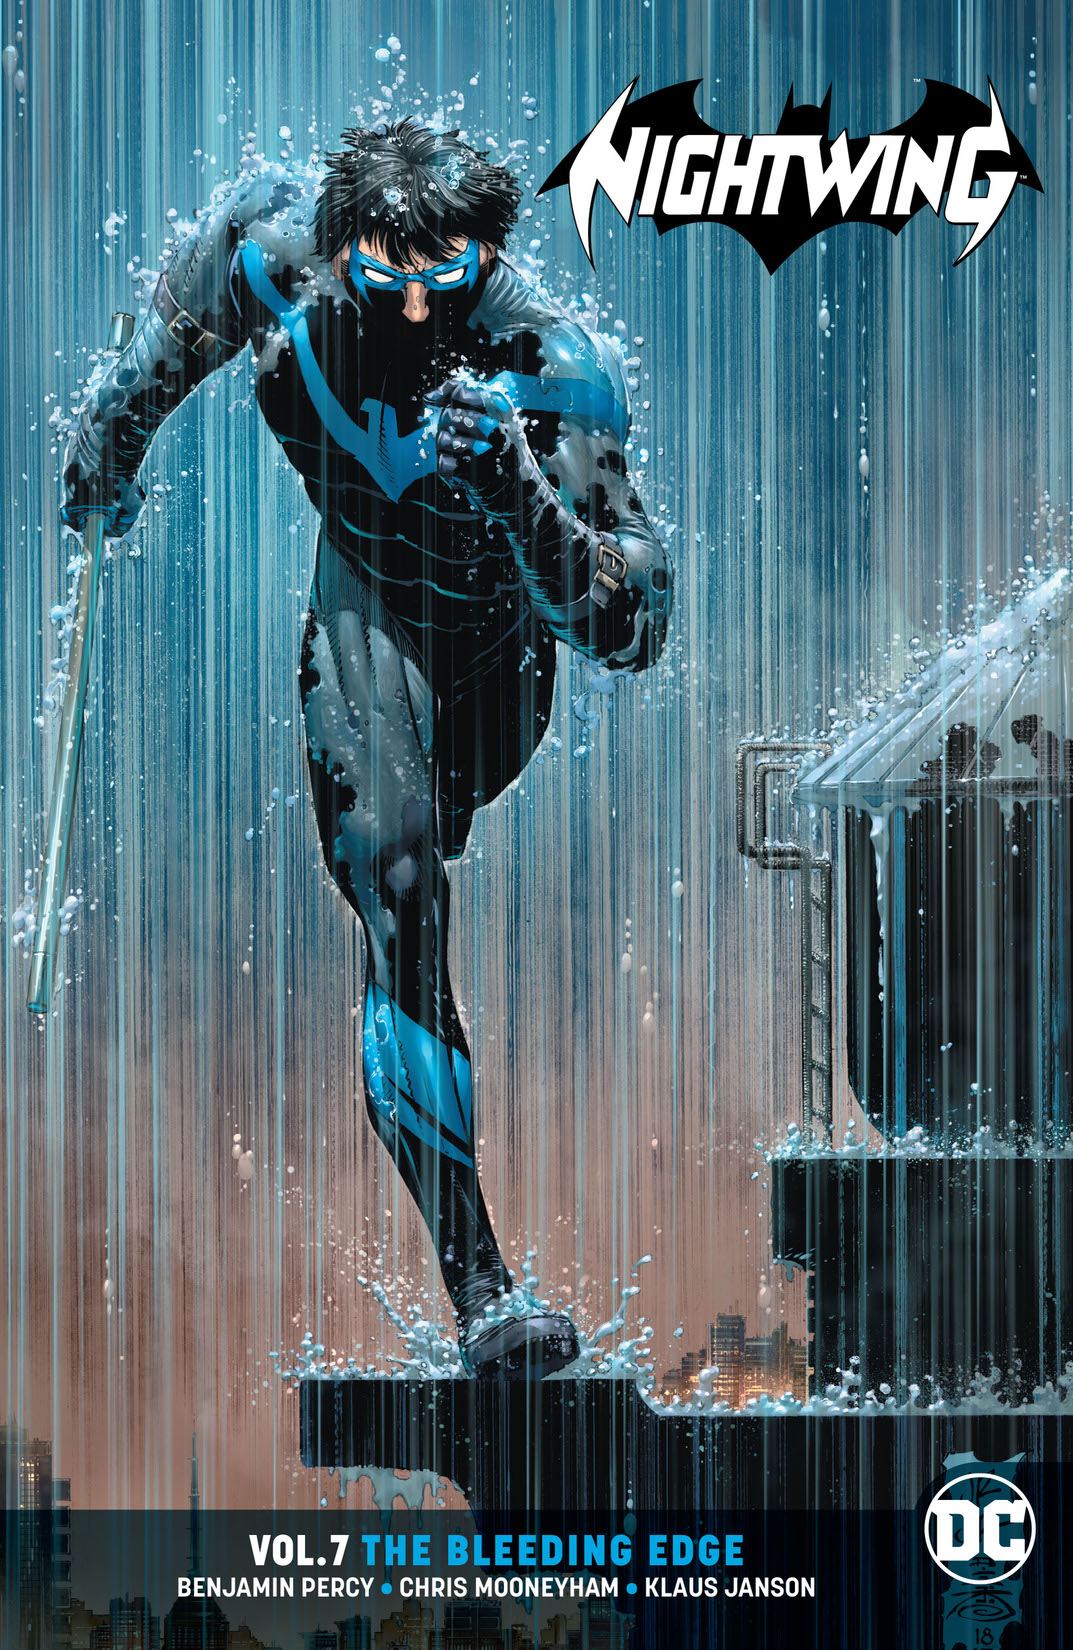 Nightwing Vol. 7: The Bleeding Edge preview images